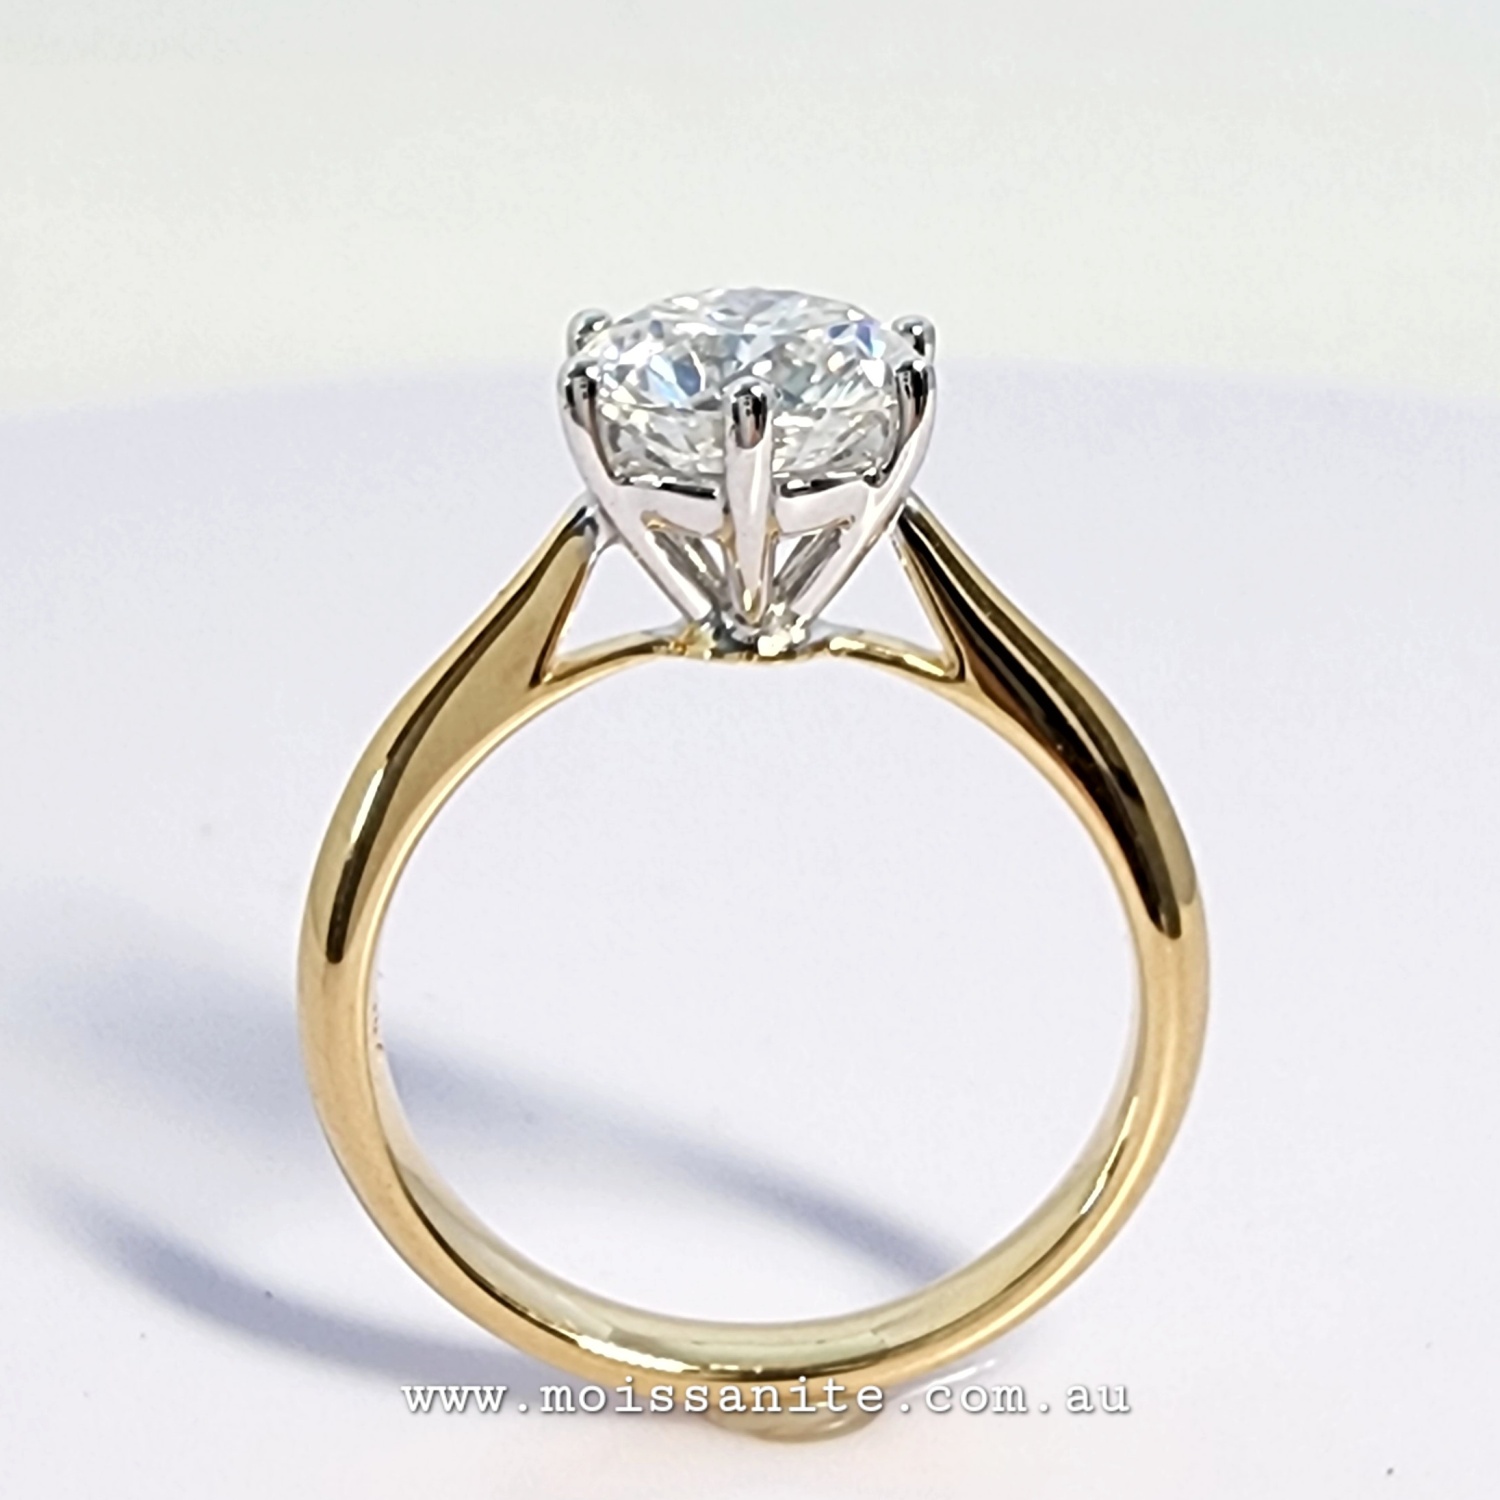 Fabulous platinum ring with 1.5ct solitaire -